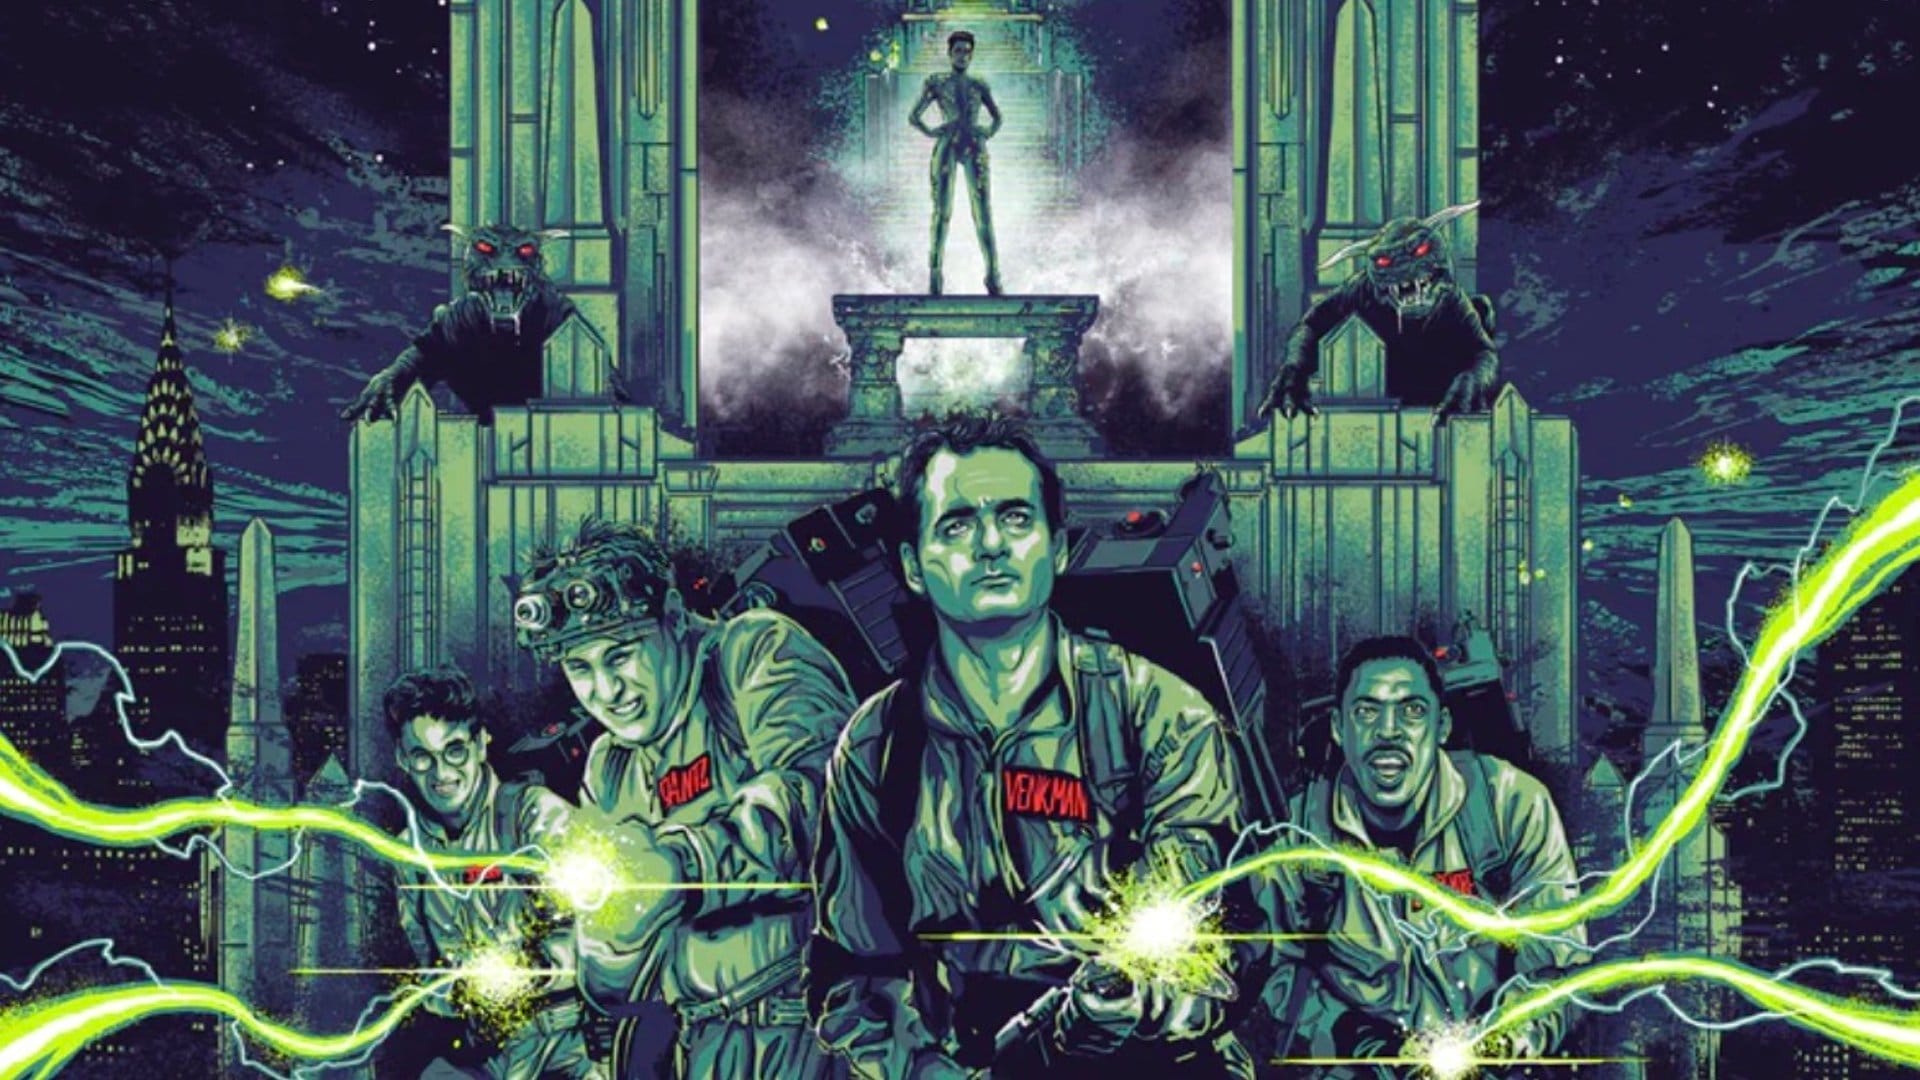 Check out this stunning Ghostbusters poster art from artist Vance Kelly